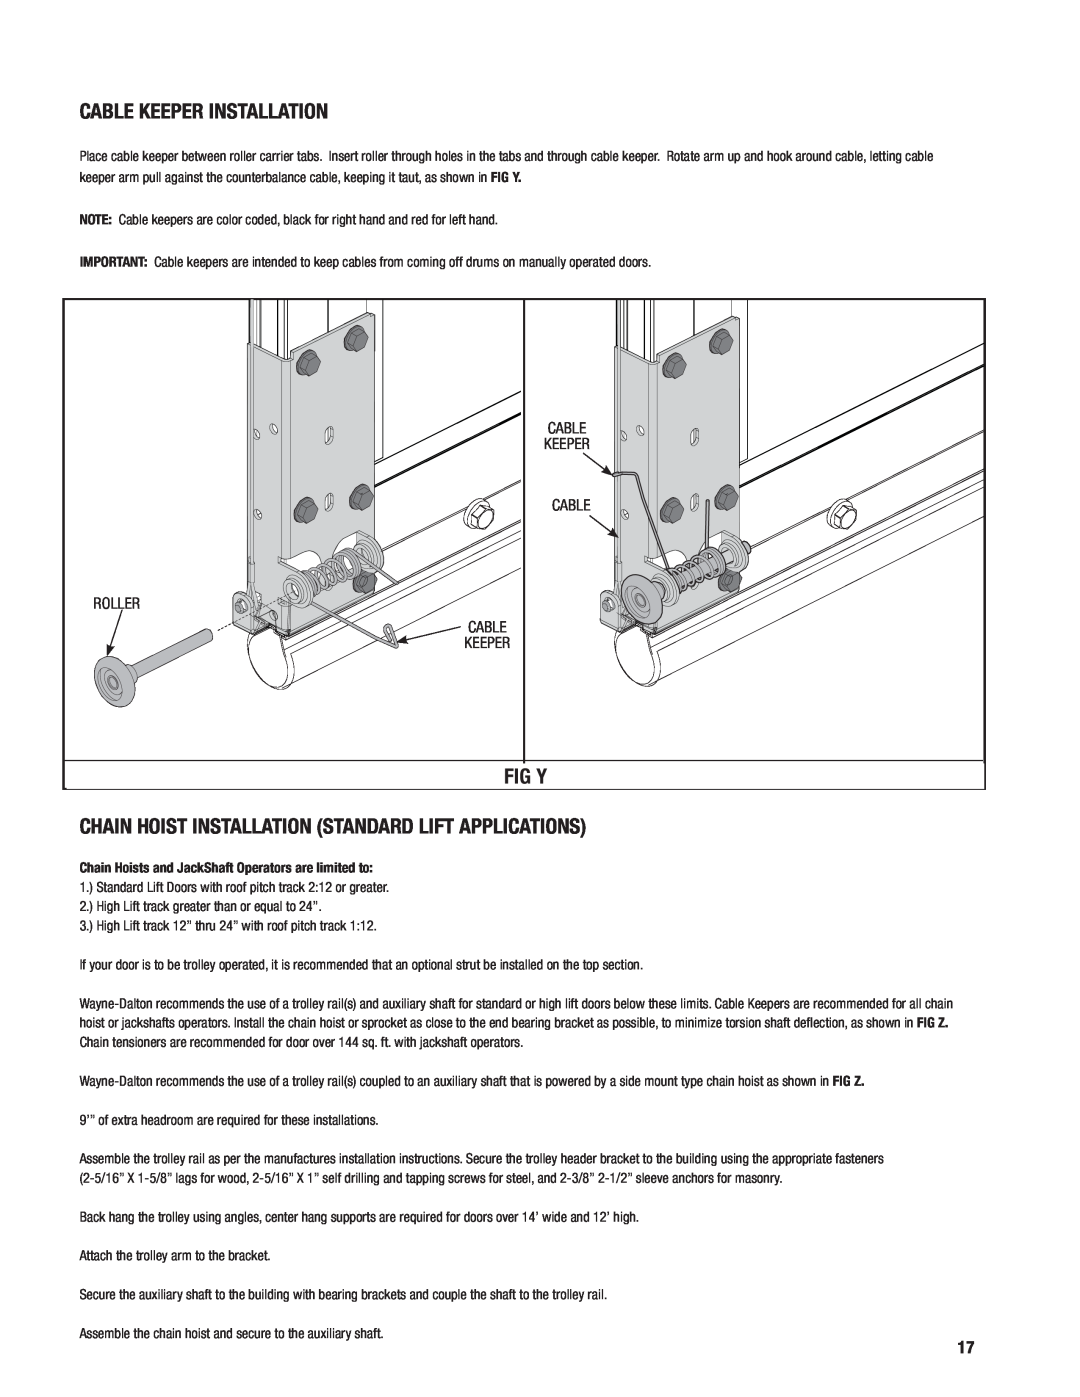 Wayne-Dalton 452, 451 installation instructions Cable Keeper Installation, Fig Y, Cable Keeper Cable Roller Cable Keeper 